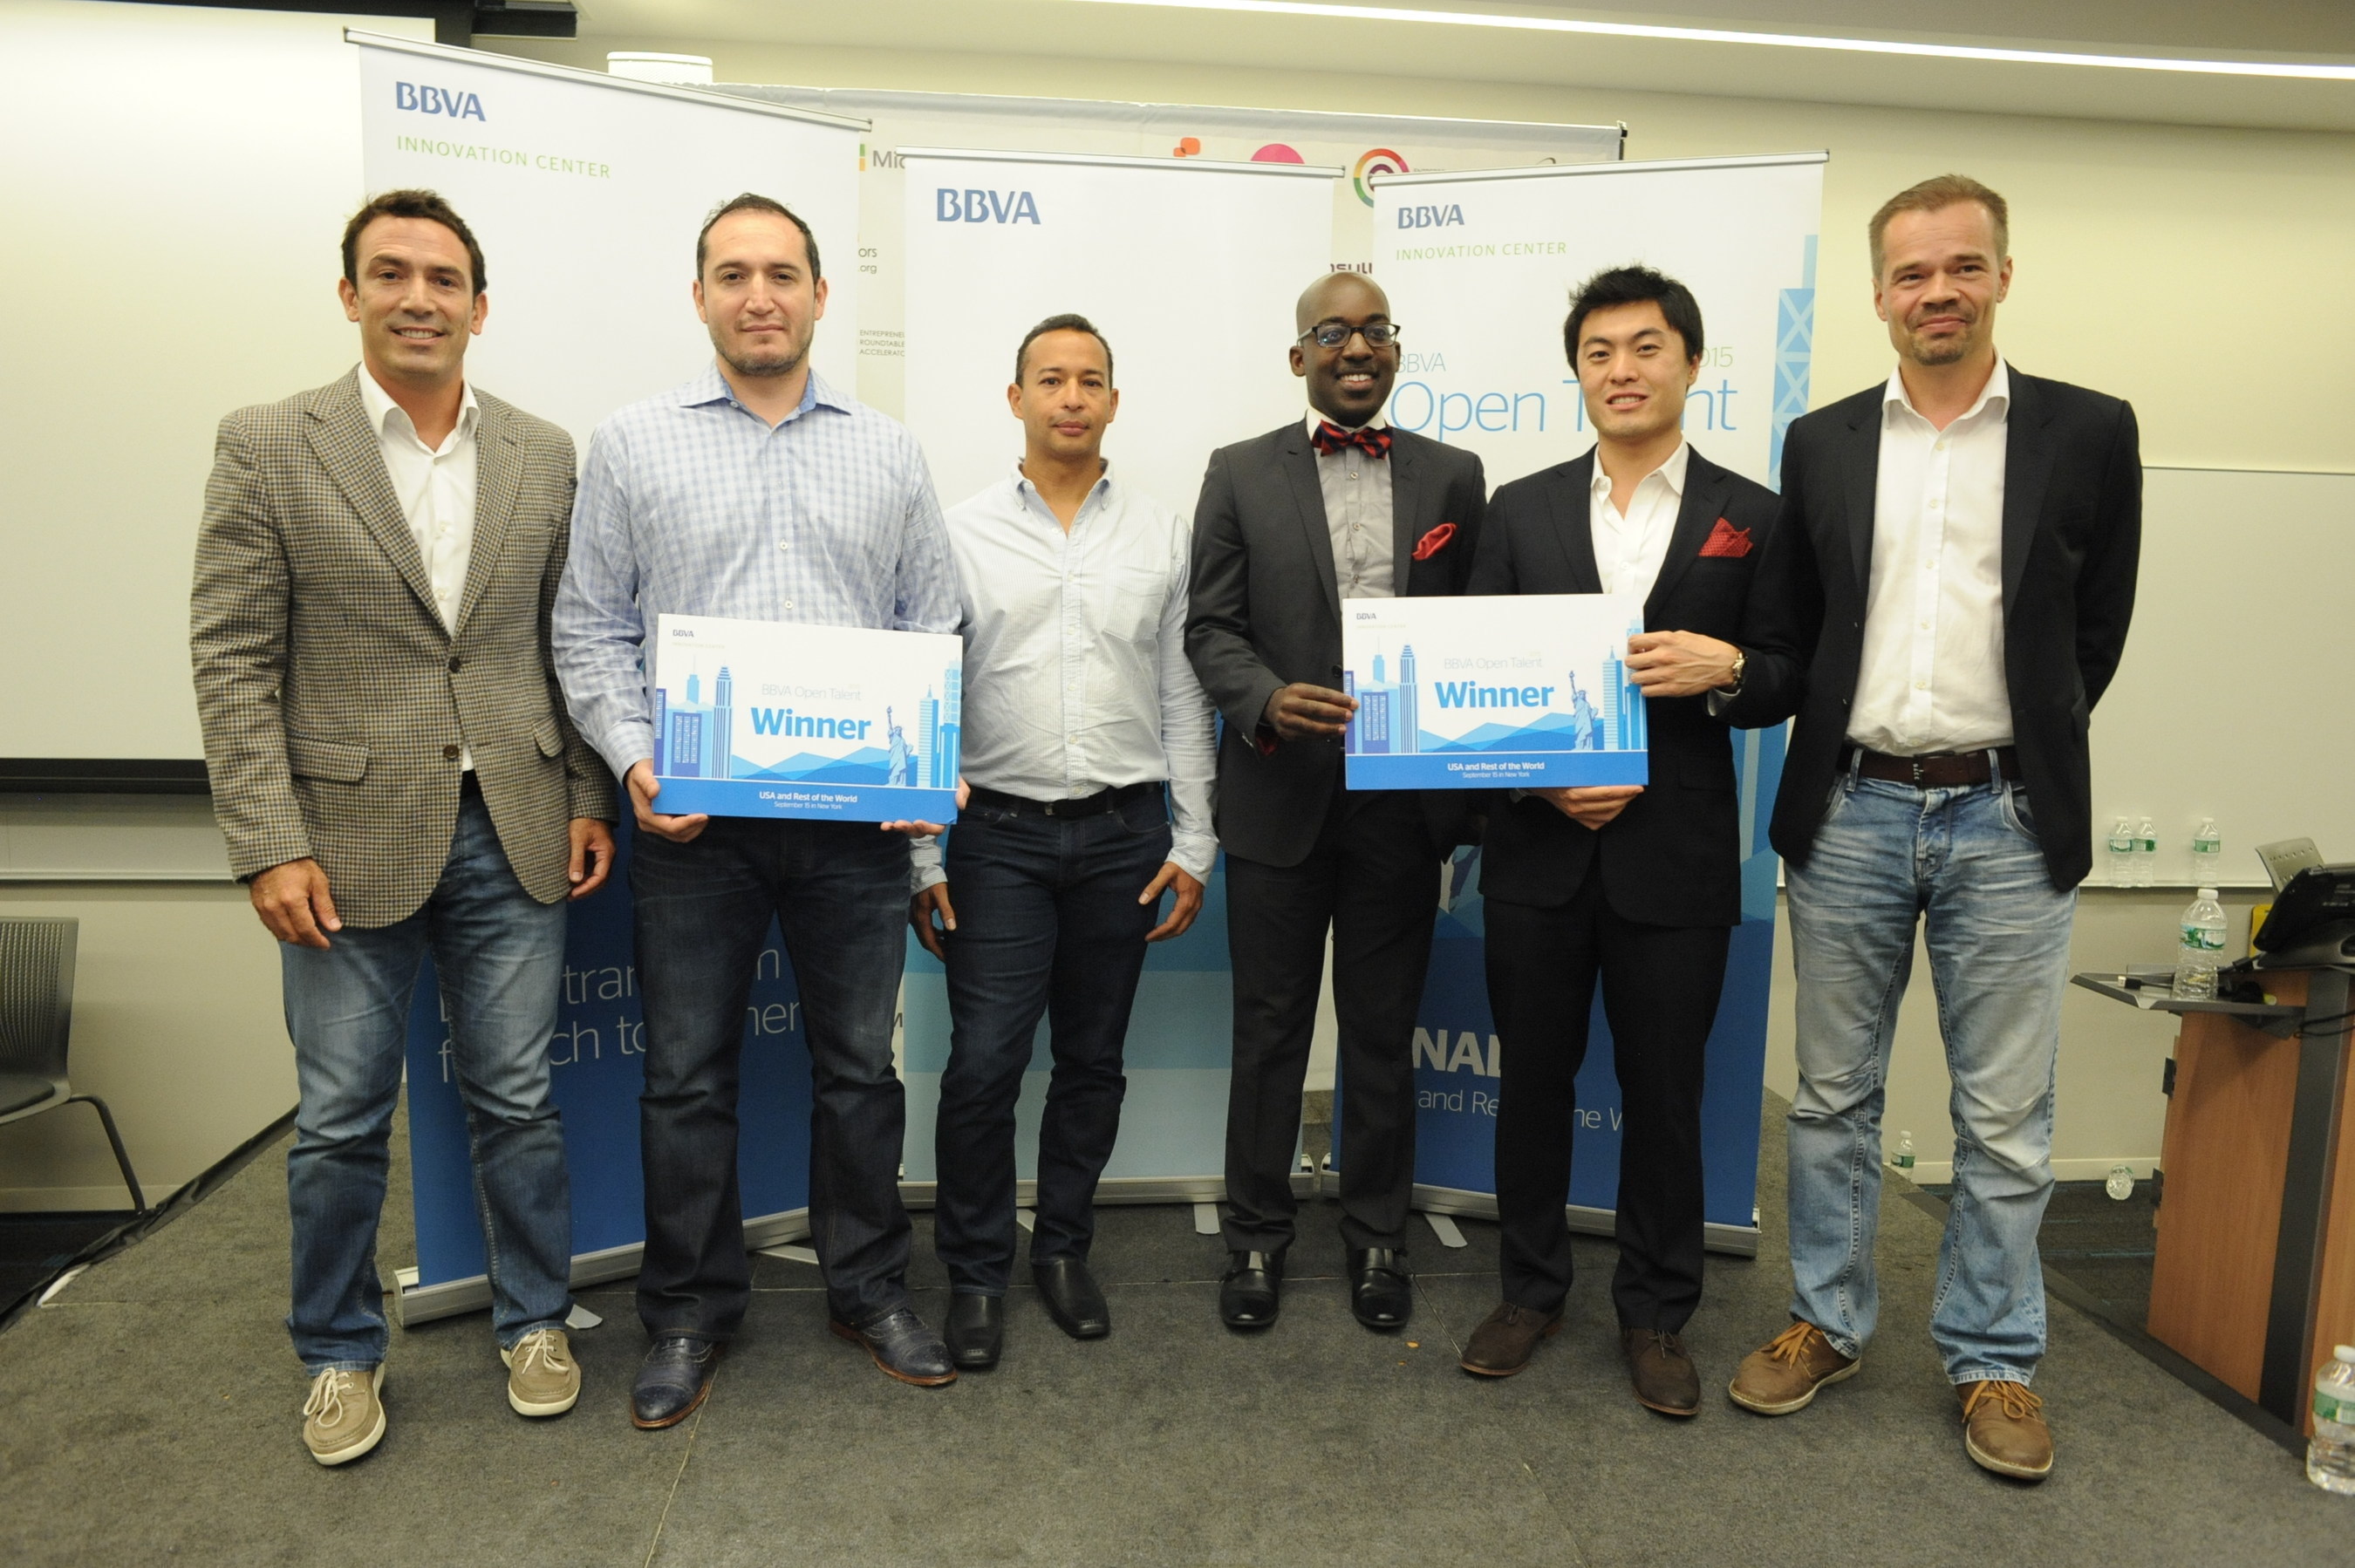 (l-r) Director of Innovation Centers and Open Innovation at BBVA Gustavo Vinacua, LendingFront CEO and co-founder Jorge Sun, LendingFront CTO and co-founder Dario Vergara, ModernLend co-founder Kobina Ansah, ModernLend co-founder Shuo Zhang, BBVA Chief Development Officer and General Manager of New Digital Businesses Teppo Paavola